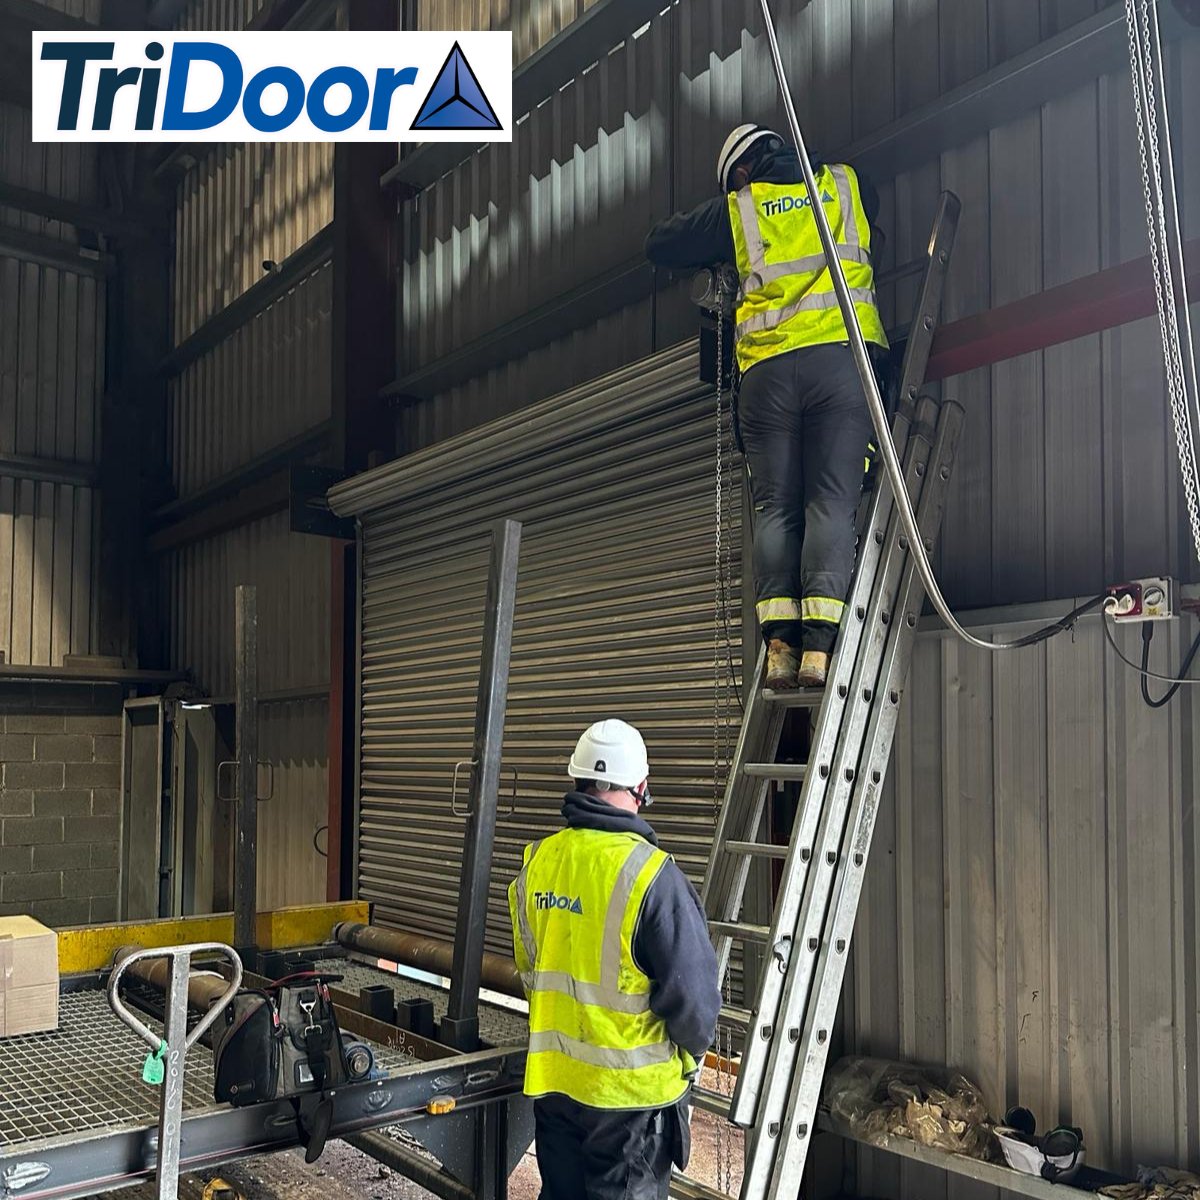 Responded to a service call for a door we installed a couple of years ago. Impact damage from the conveyor caused it to jam & misalign travel limits. We swiftly fixed it. Also provided a quote for further repairs
🌐Our Website: tridoor.co.uk
#ServiceCall #DoorRepair